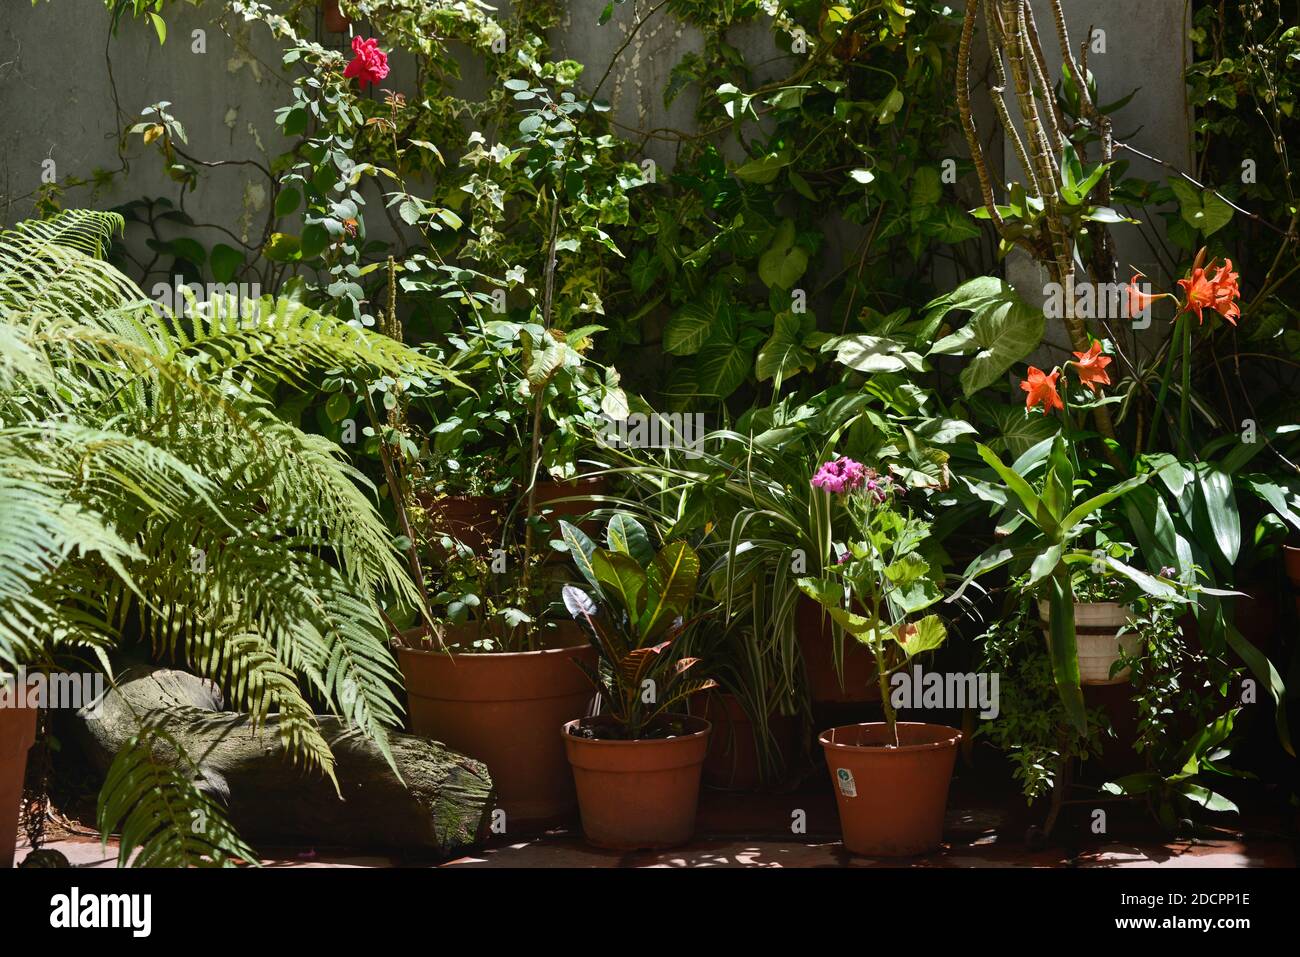 House garden with geranium, lillies and roses Stock Photo